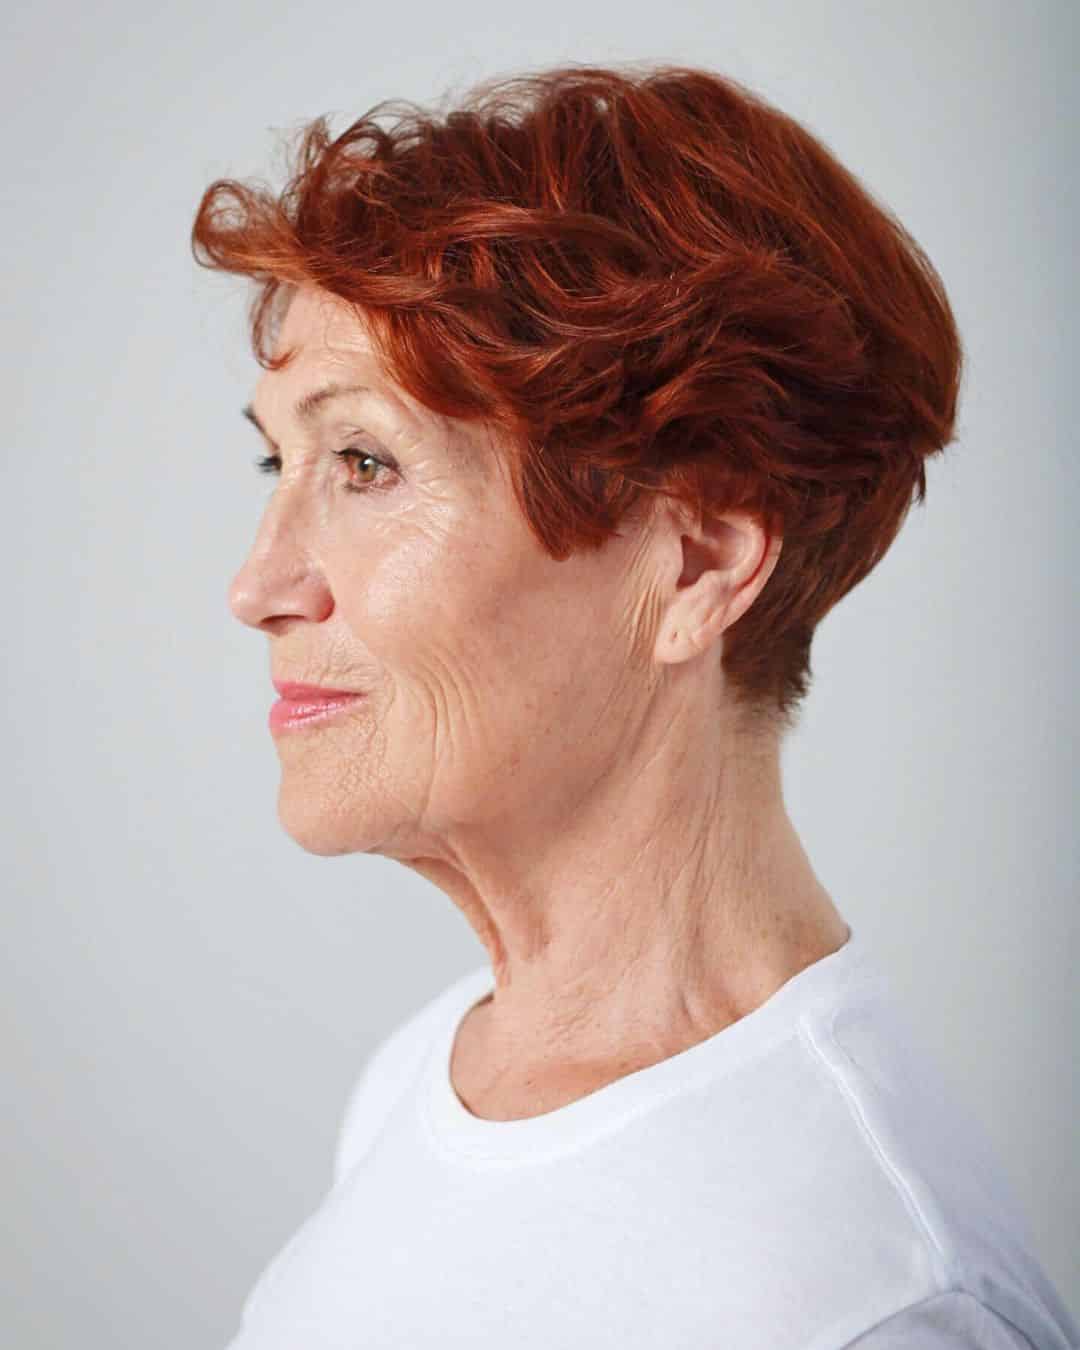 Bright short wedge haircut for women in their 70s